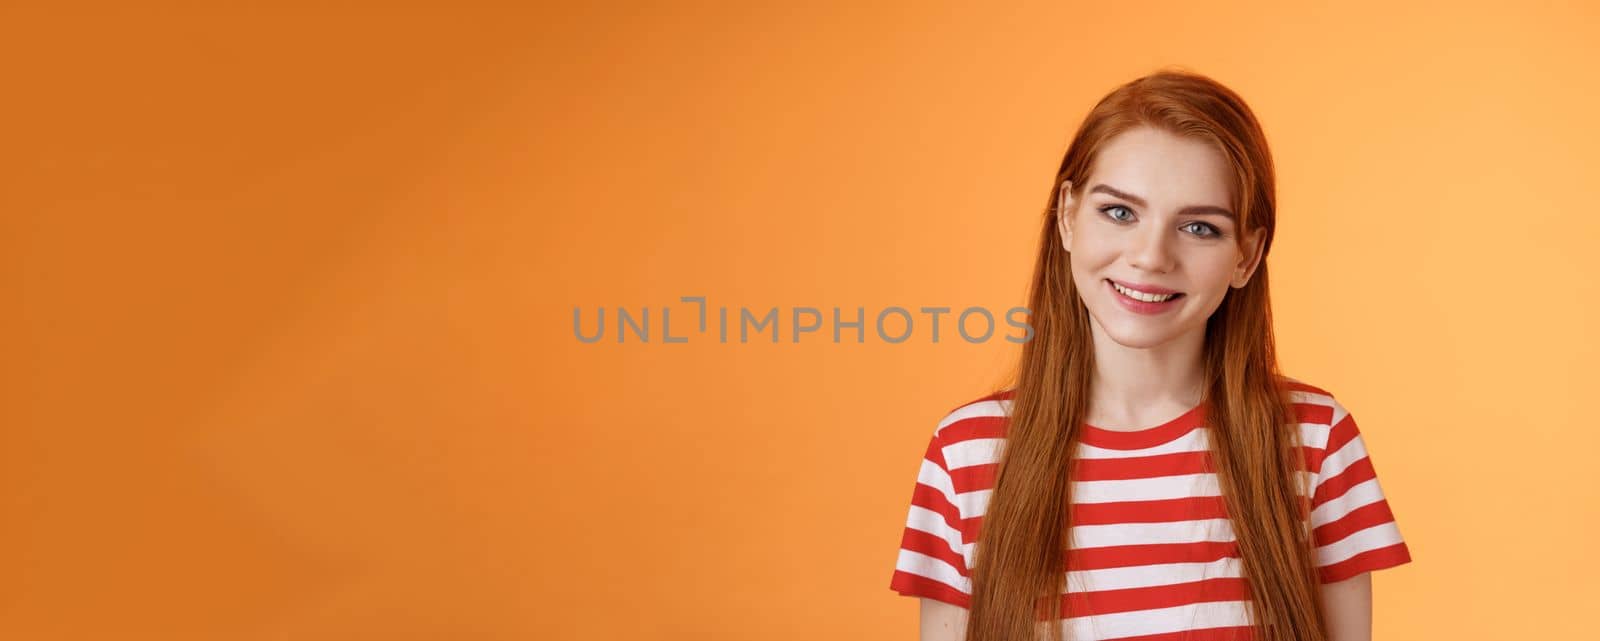 Close-up tender cute redhead young woman smiling joyfully, express happiness friendly emotions, look camera silly lovely grin, gaze satisfied, chat delighted, pleasant conversation orange background.